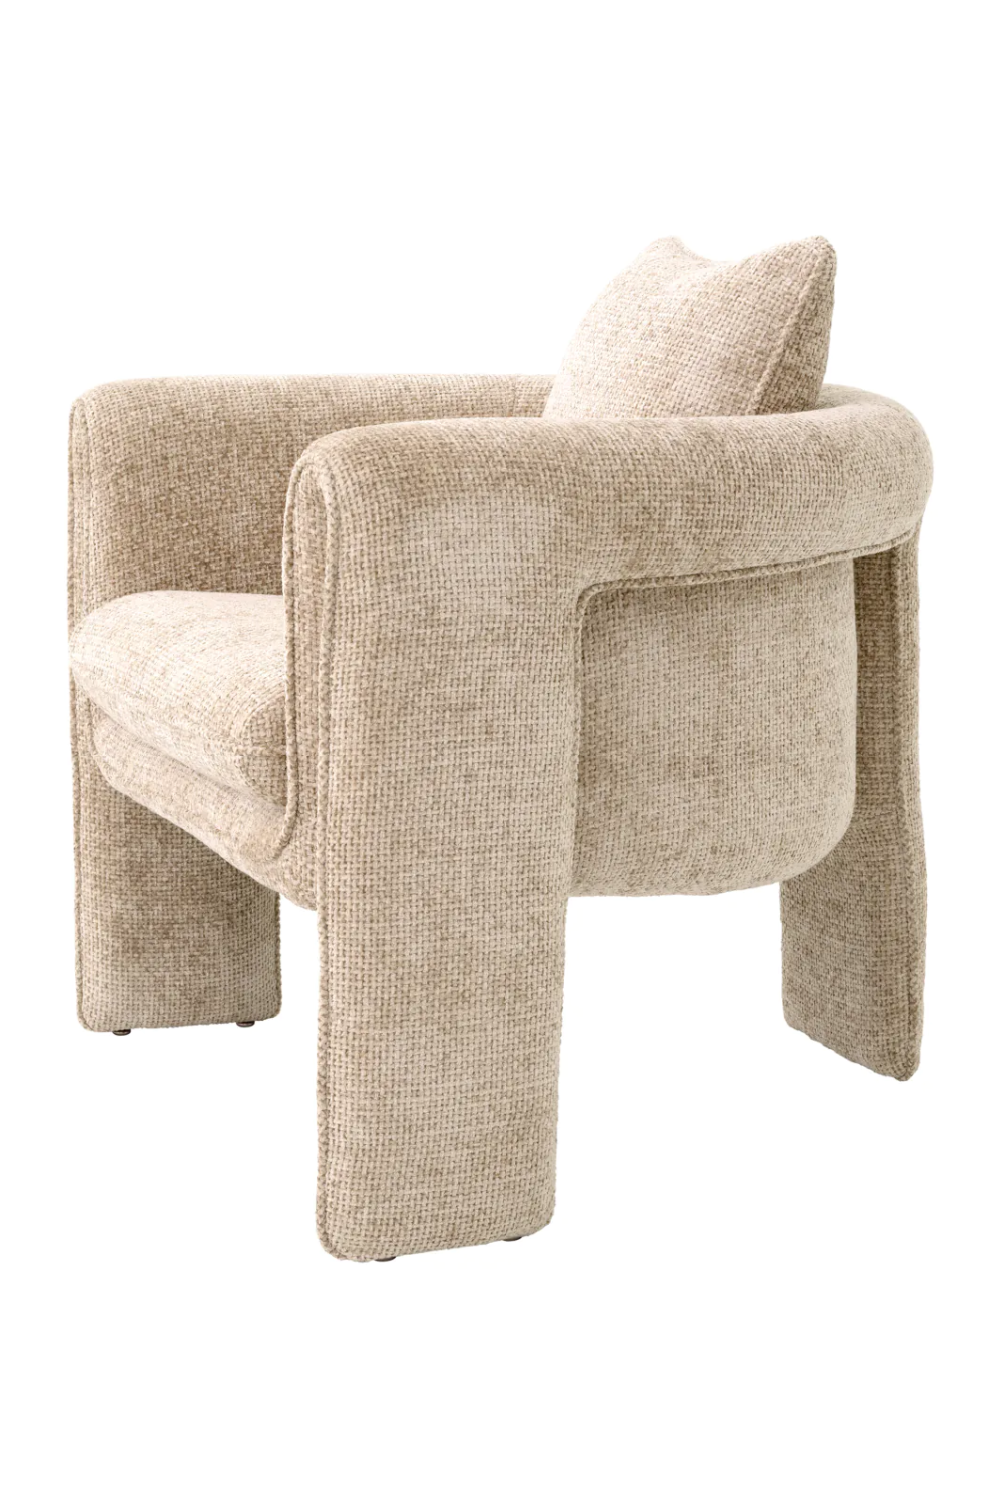 Sculptural Upholstered Lounge Chair | Eichholtz Toto | Oroa.com